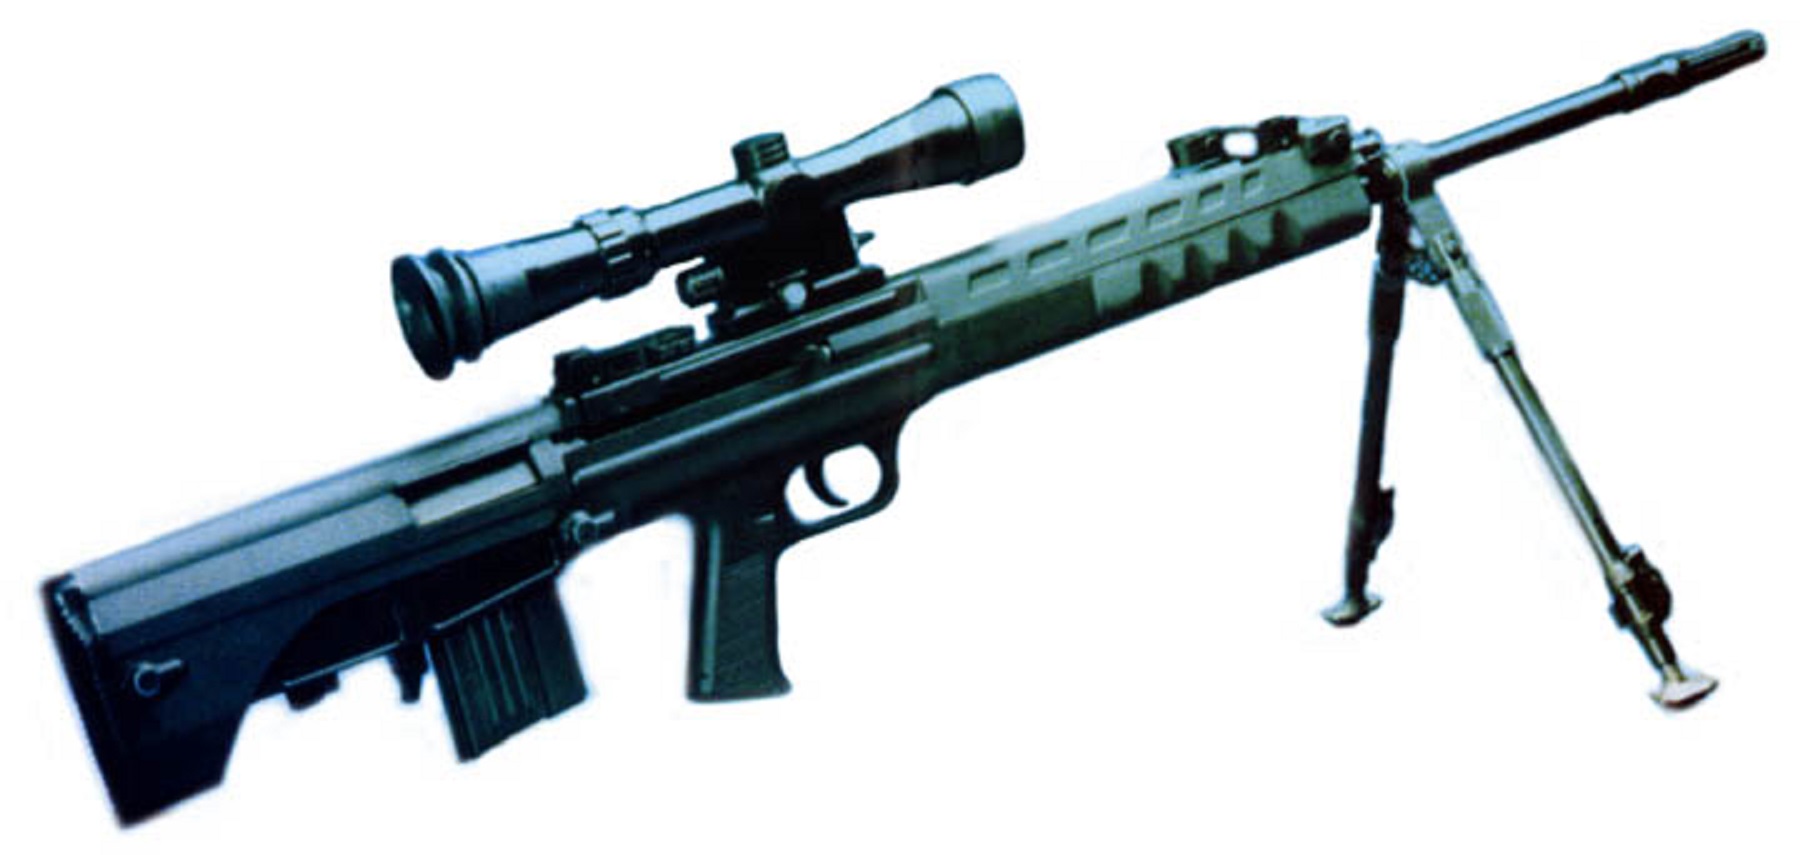 Type And 85 Check Out China S Two Precision Rifles The National Interest